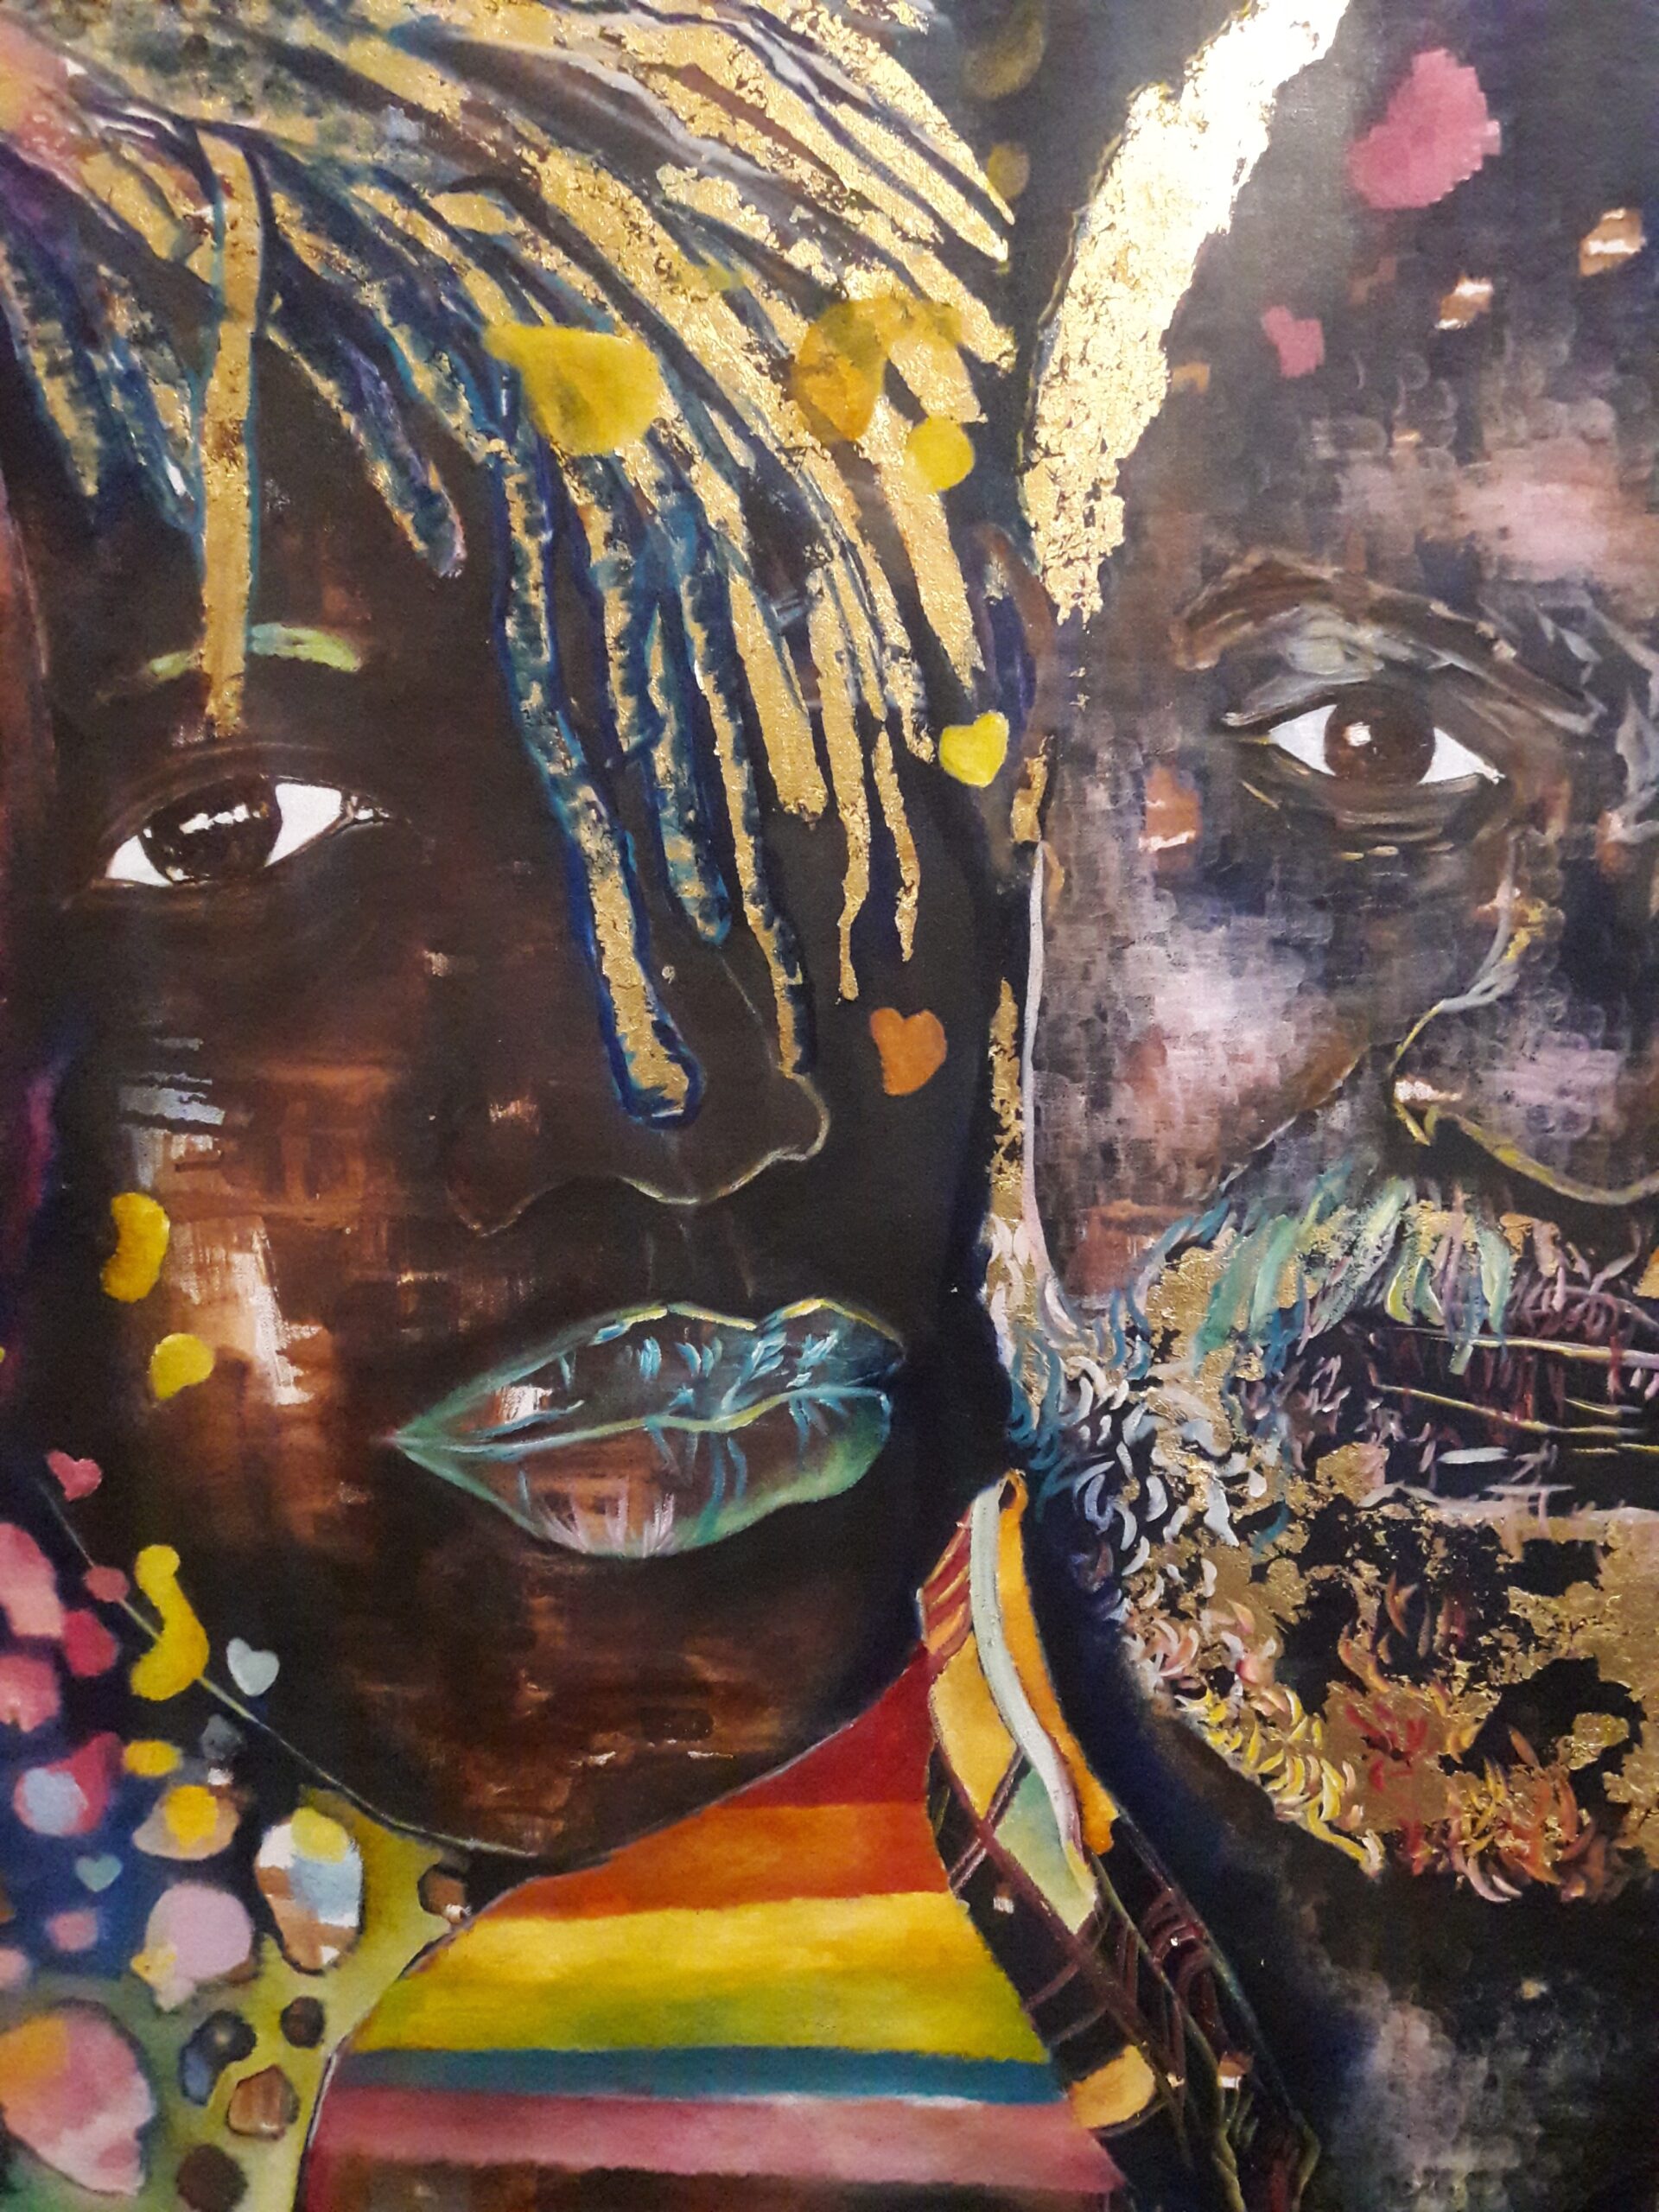 A painting of two people's faces